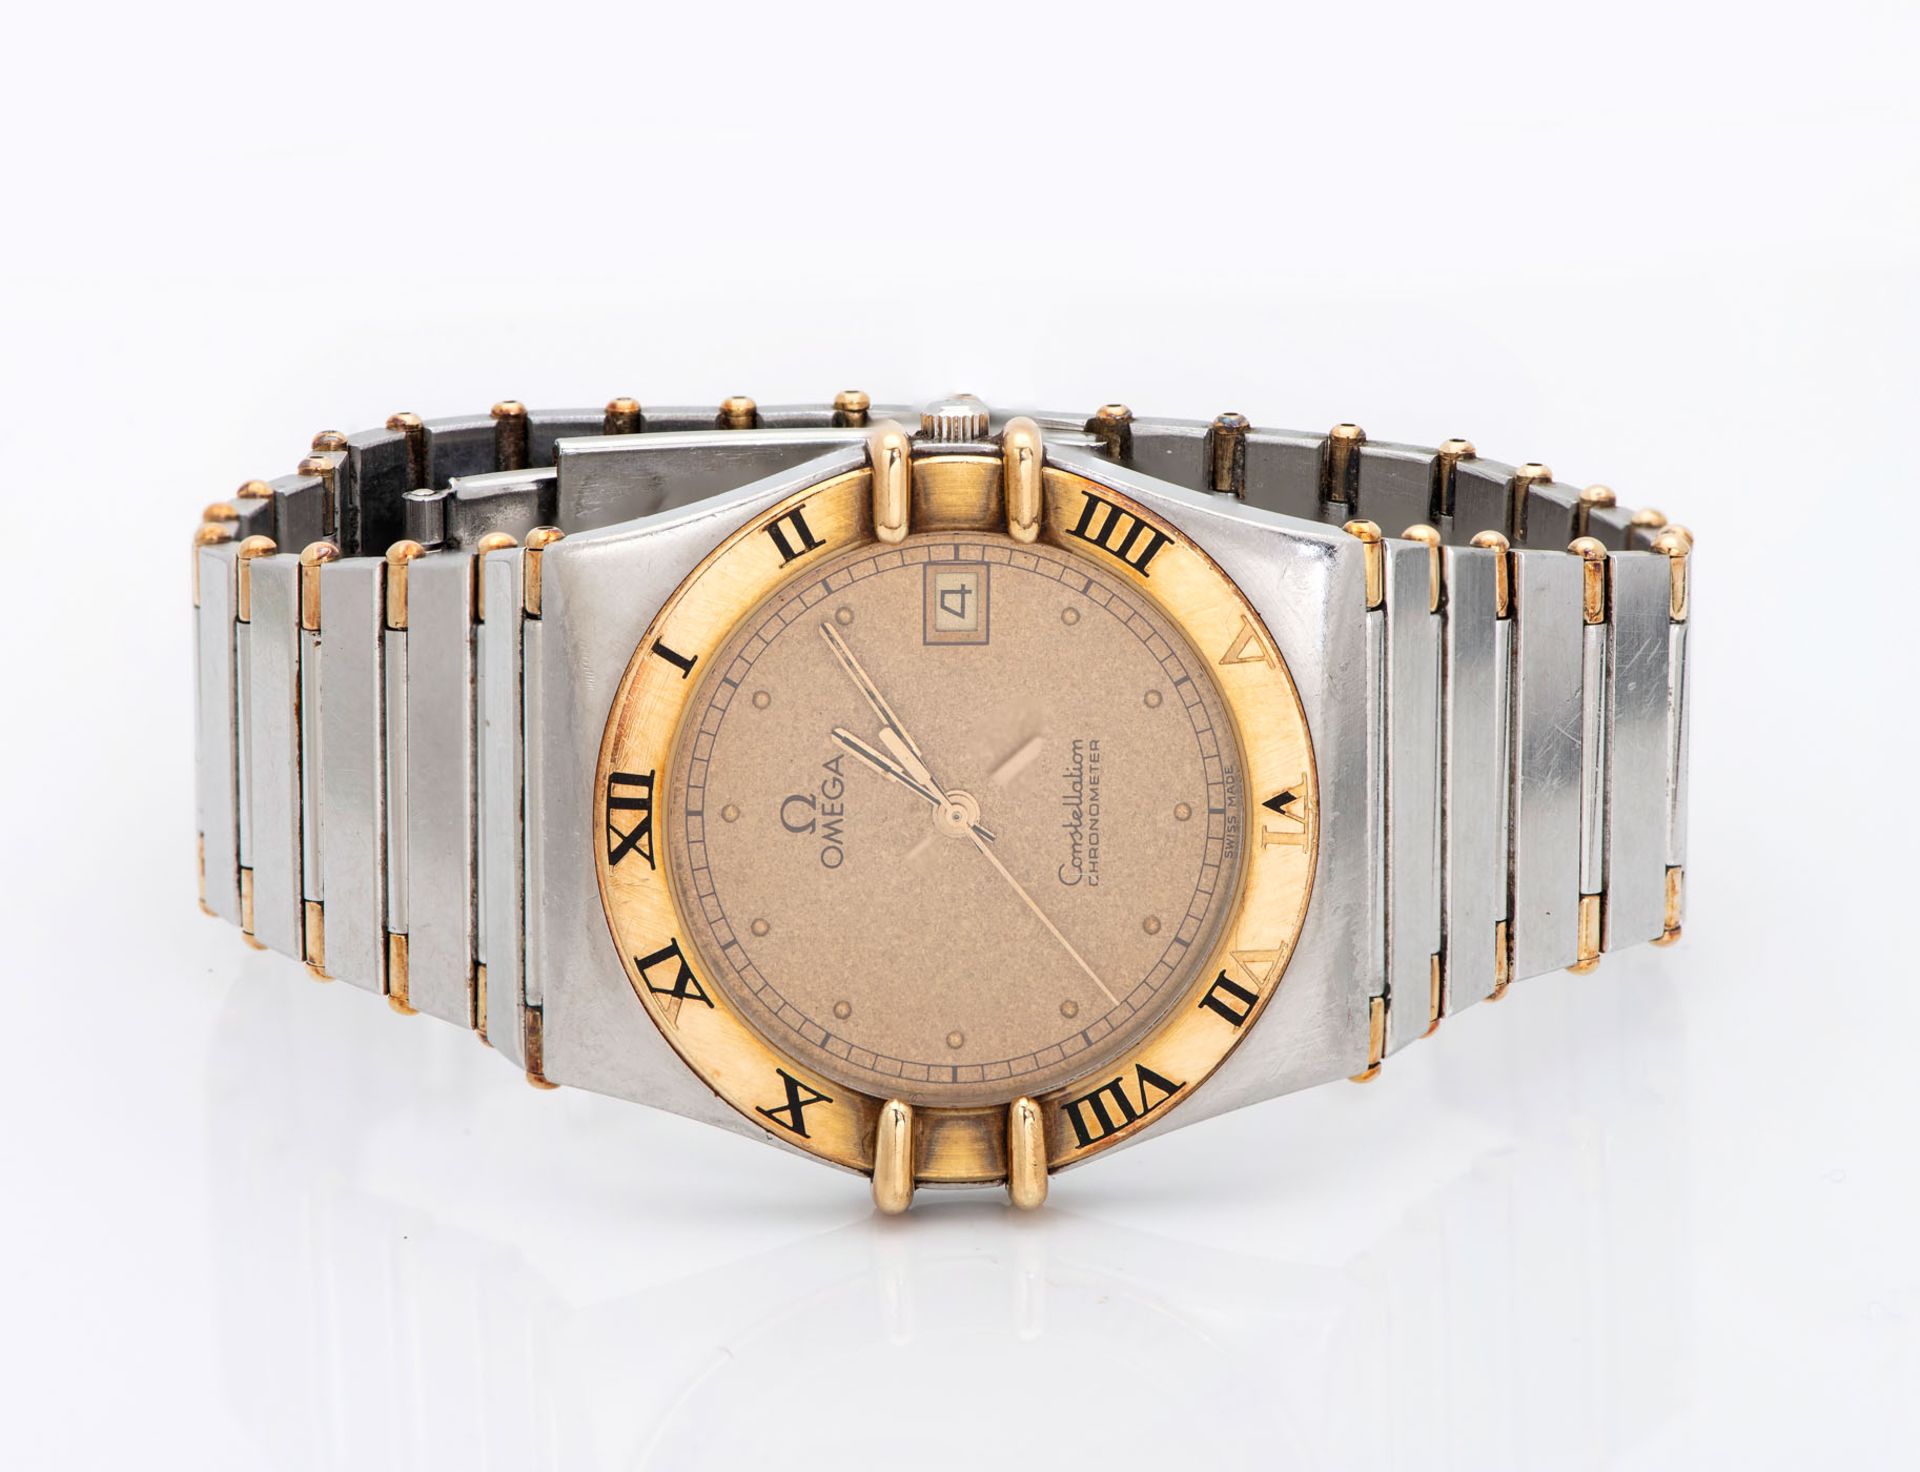 An Omega Constellation Chronometer 18k Gold and Stainless Steel Wristwatch - Image 2 of 3